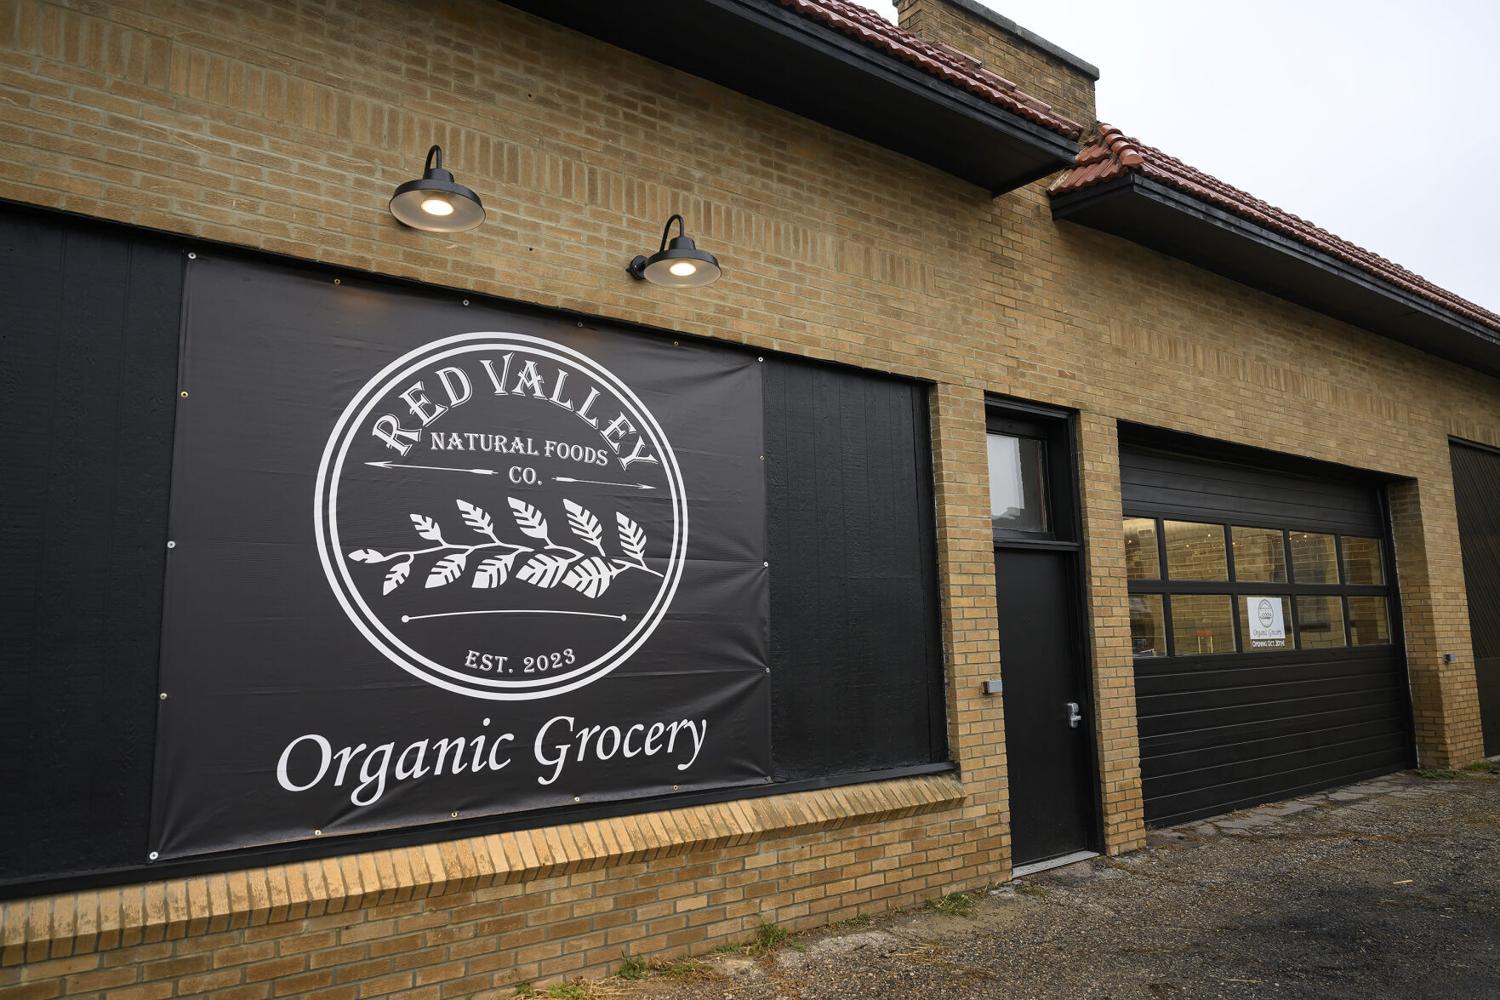 Red Valley Natural Foods offers panoply of organic options [Video]